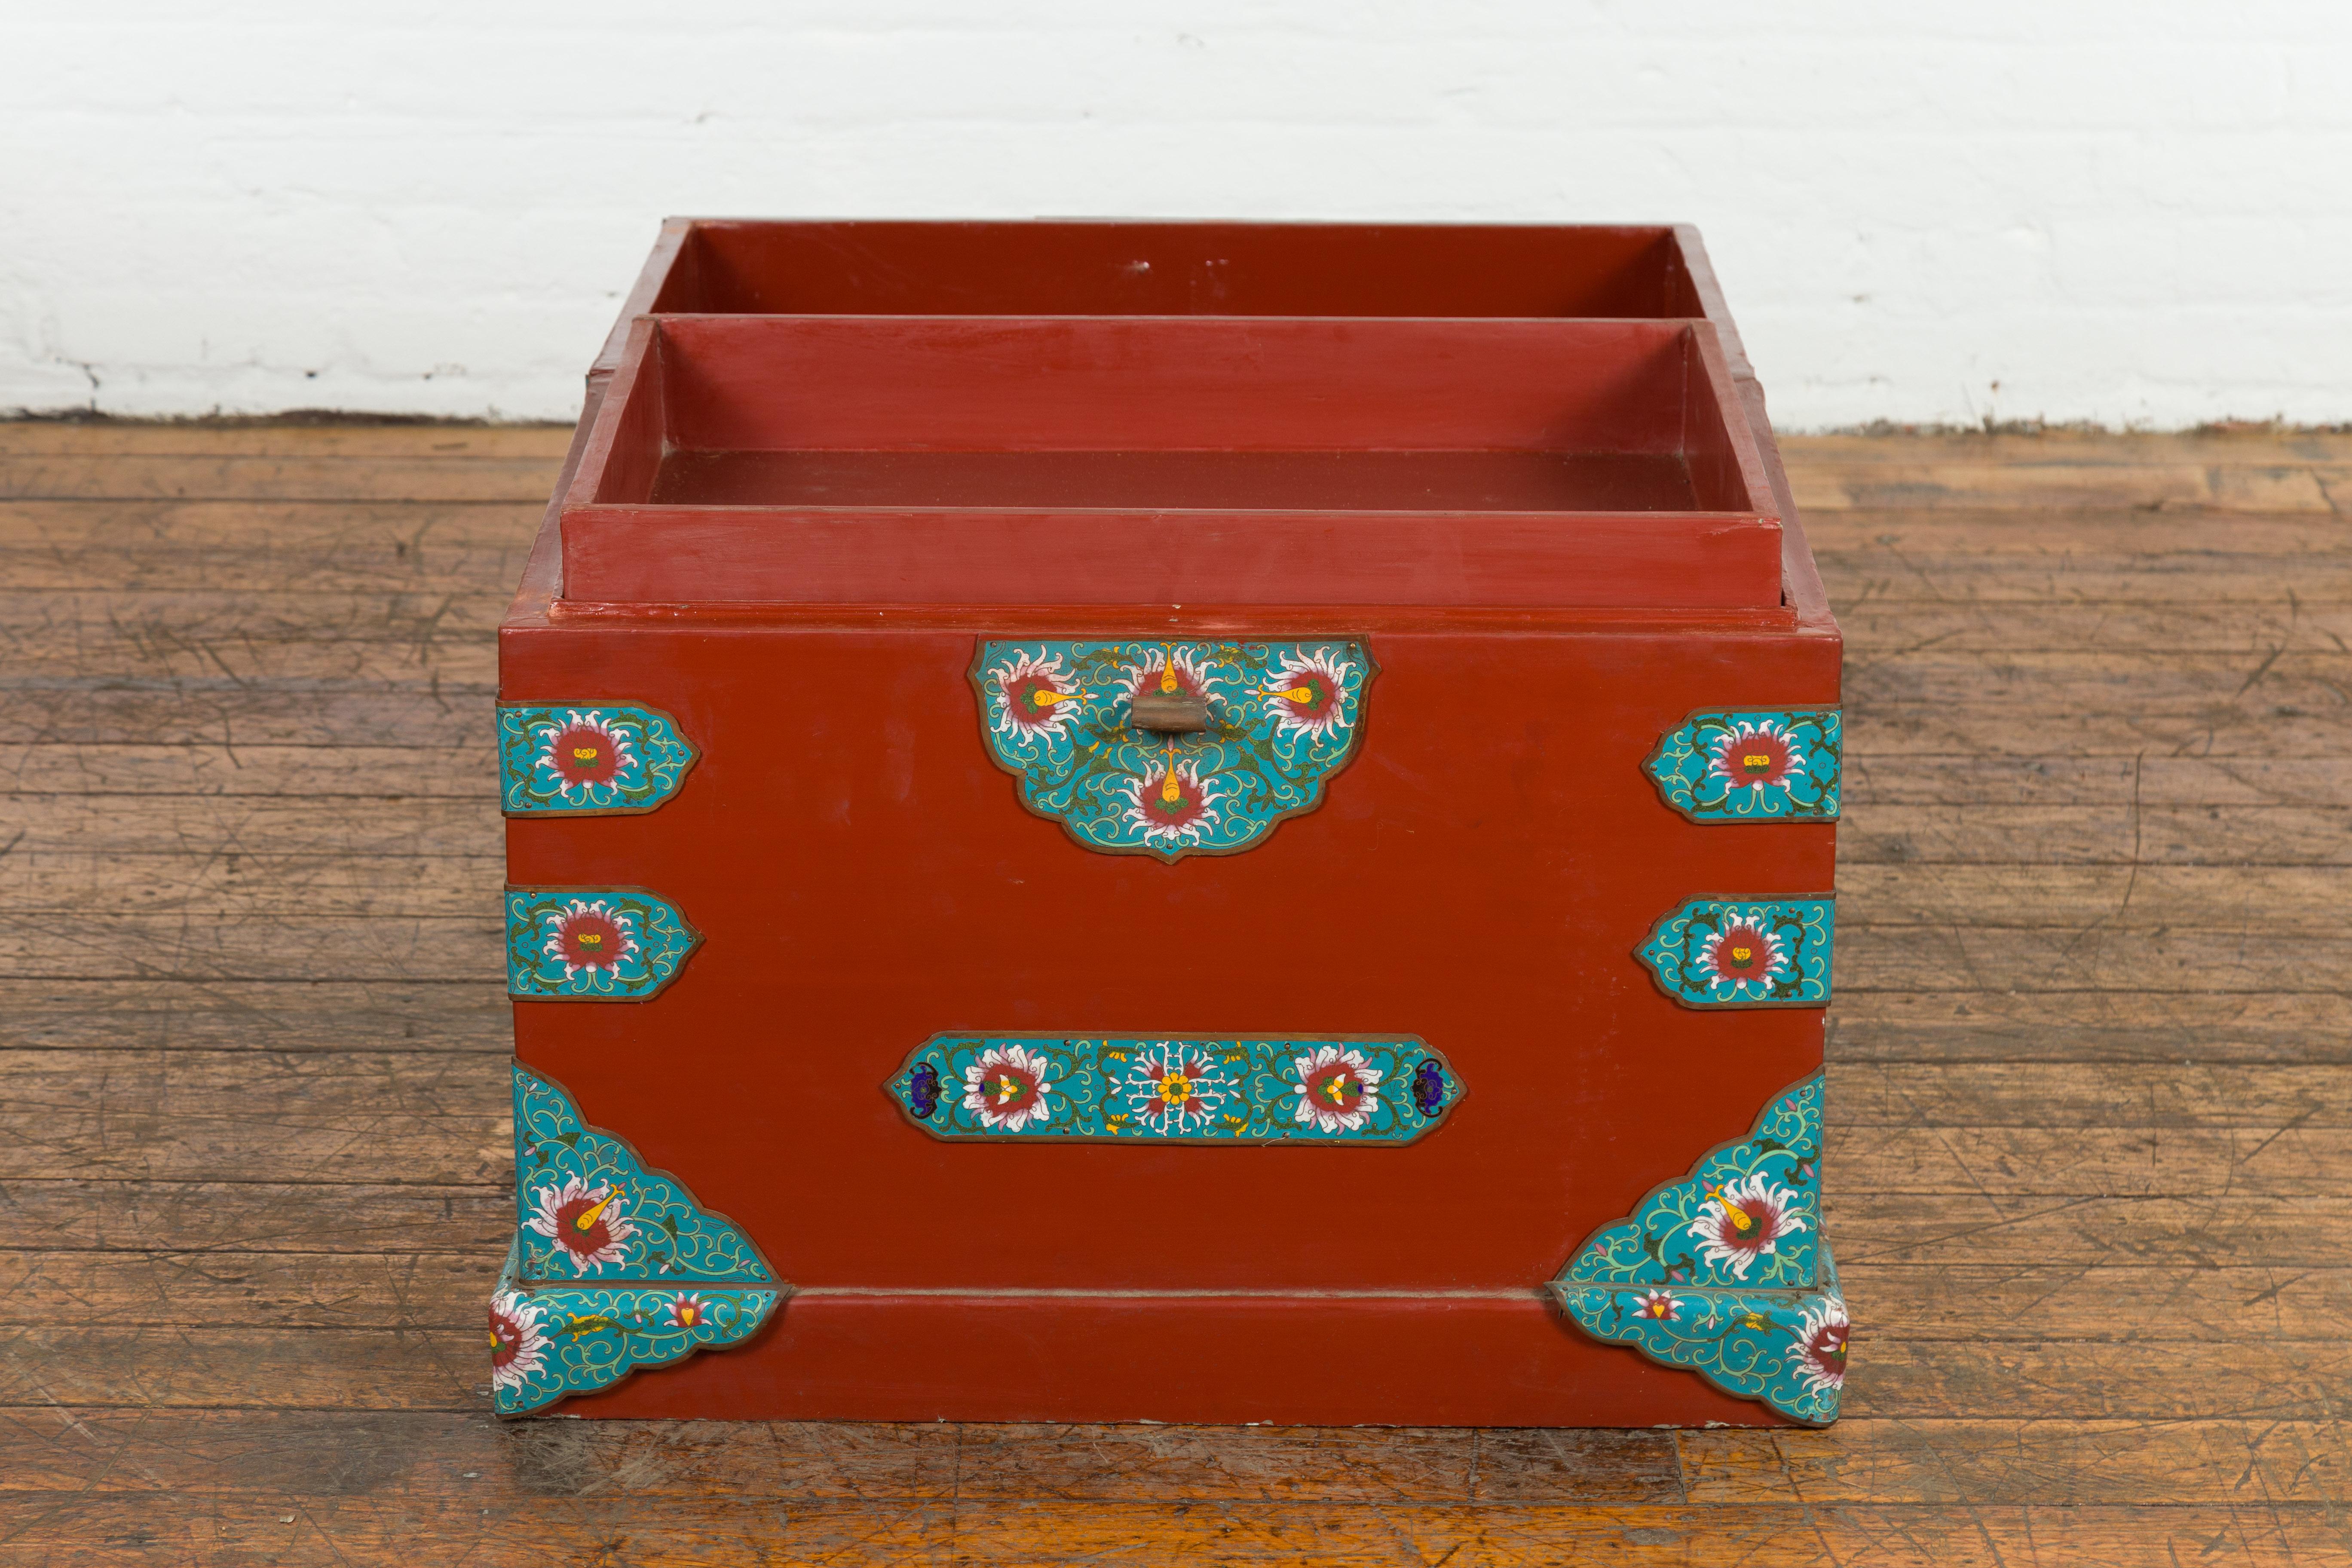 Chinese Vintage Blanket Chest with Red Lacquer and Cloisonné Floral Décor In Good Condition For Sale In Yonkers, NY